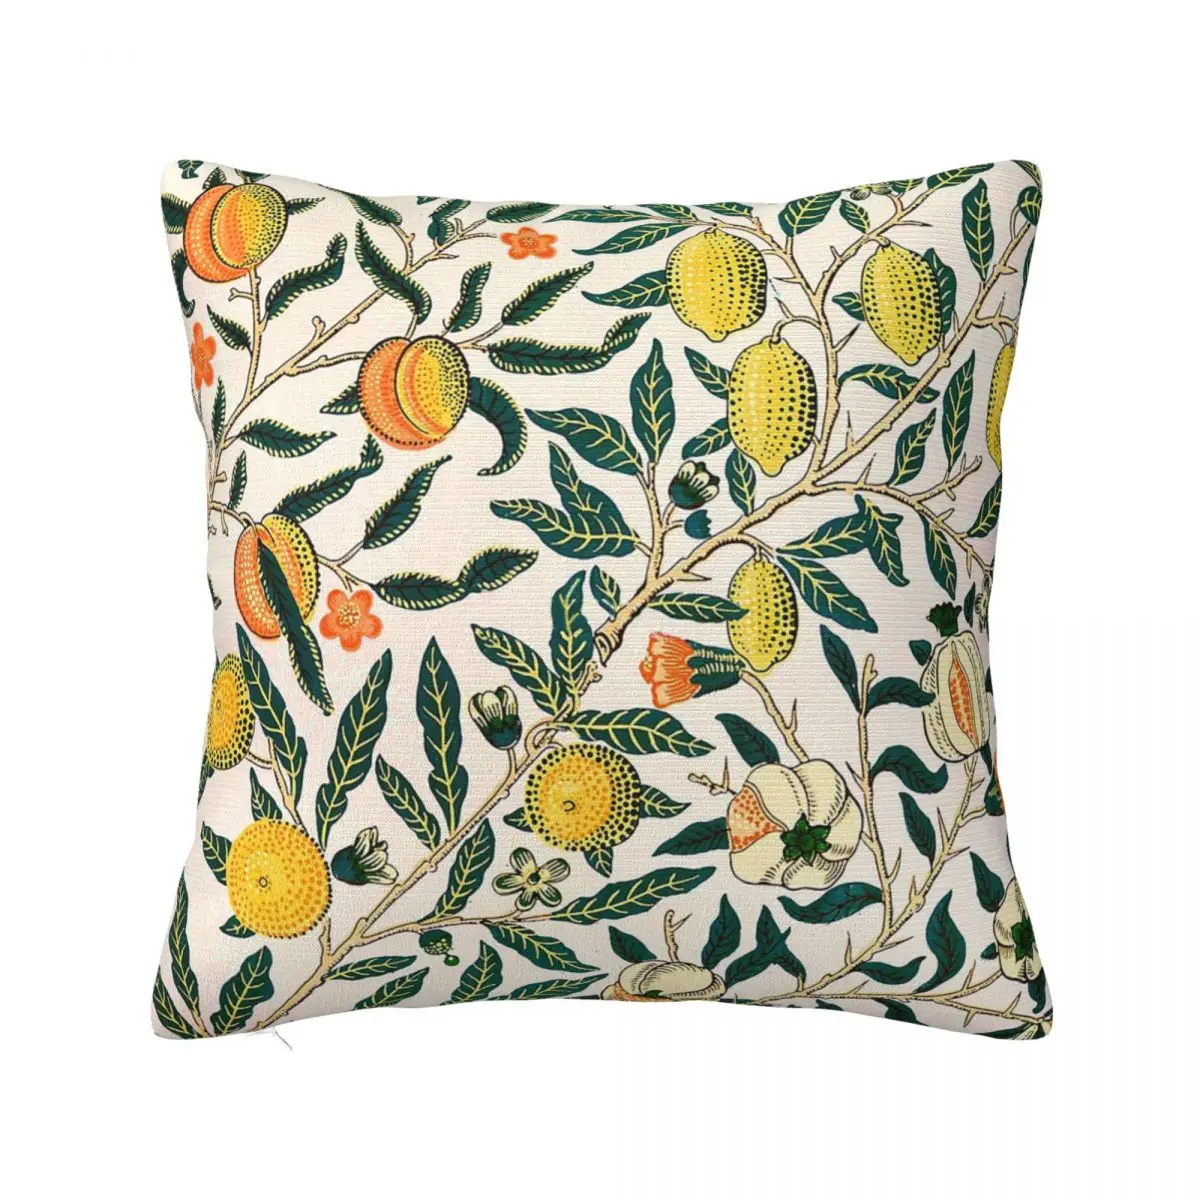 

Fruit Or Pomegranate By William Morris Polyester Cushion Cover Gift Throw Pillow Case Cover for Home decorative cushions